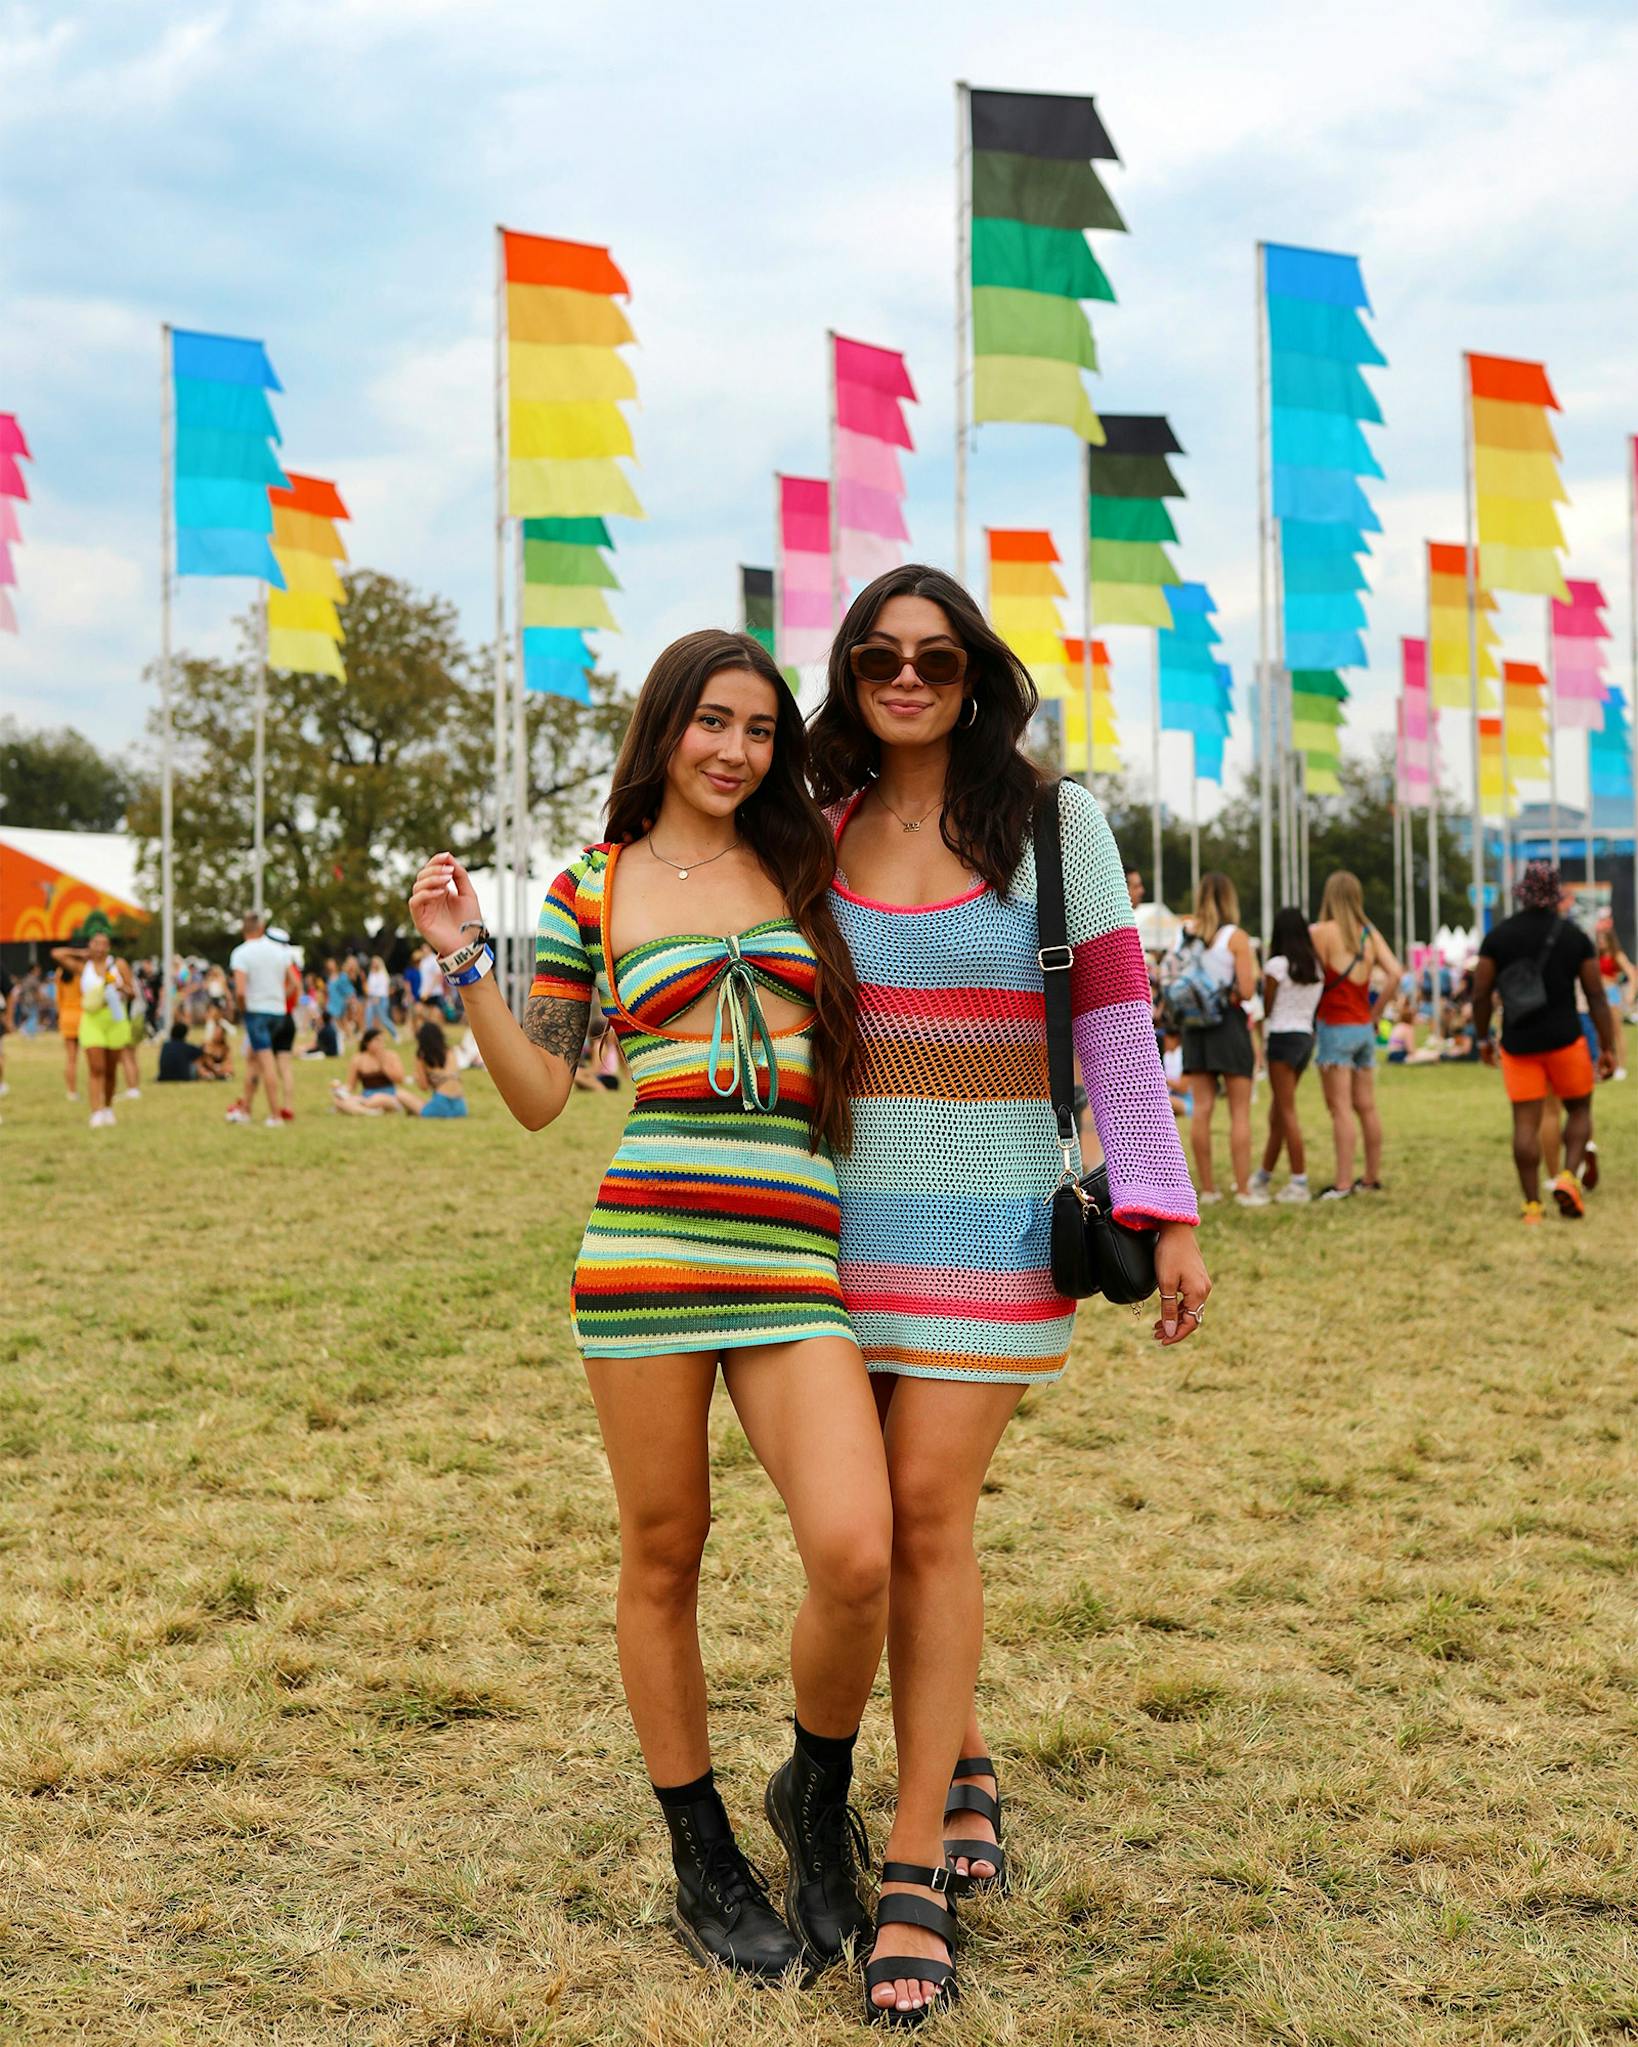 Photos What To Wear To ACL Fest; The Fashion We're Seeing This Year